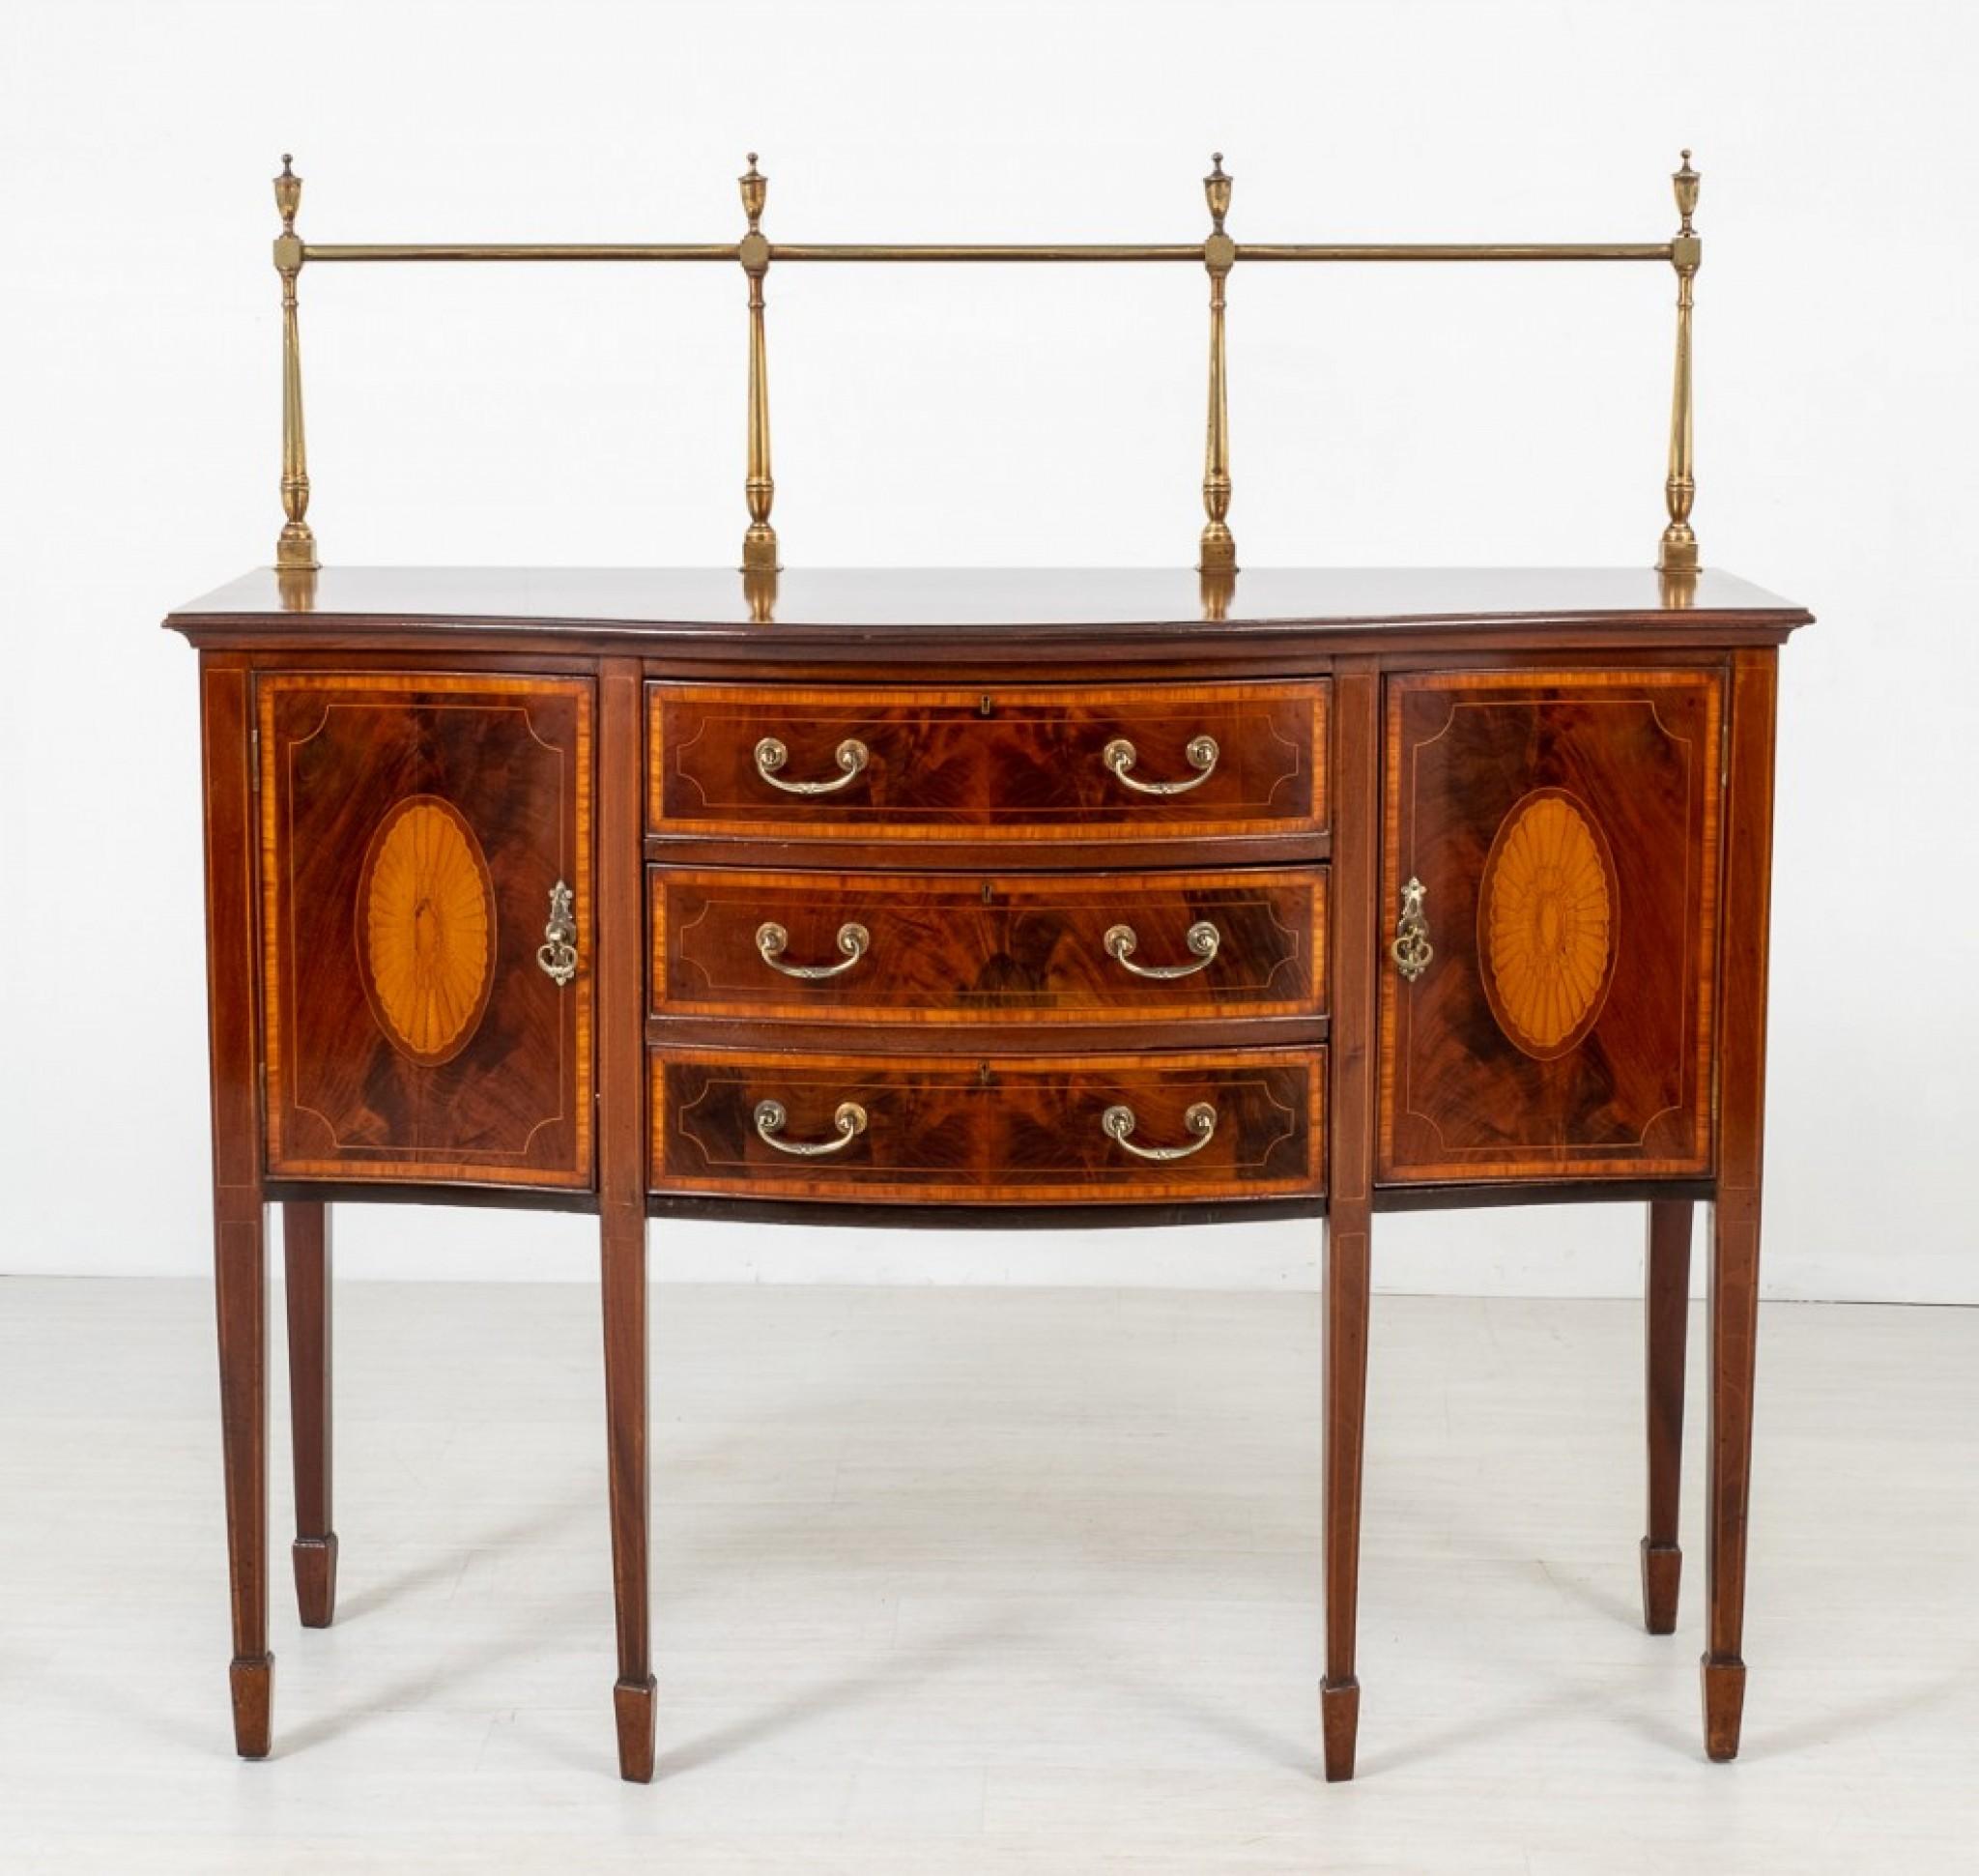 Mahogany Sheraton Revival Sideboard, Antique Buffet, 1890 For Sale